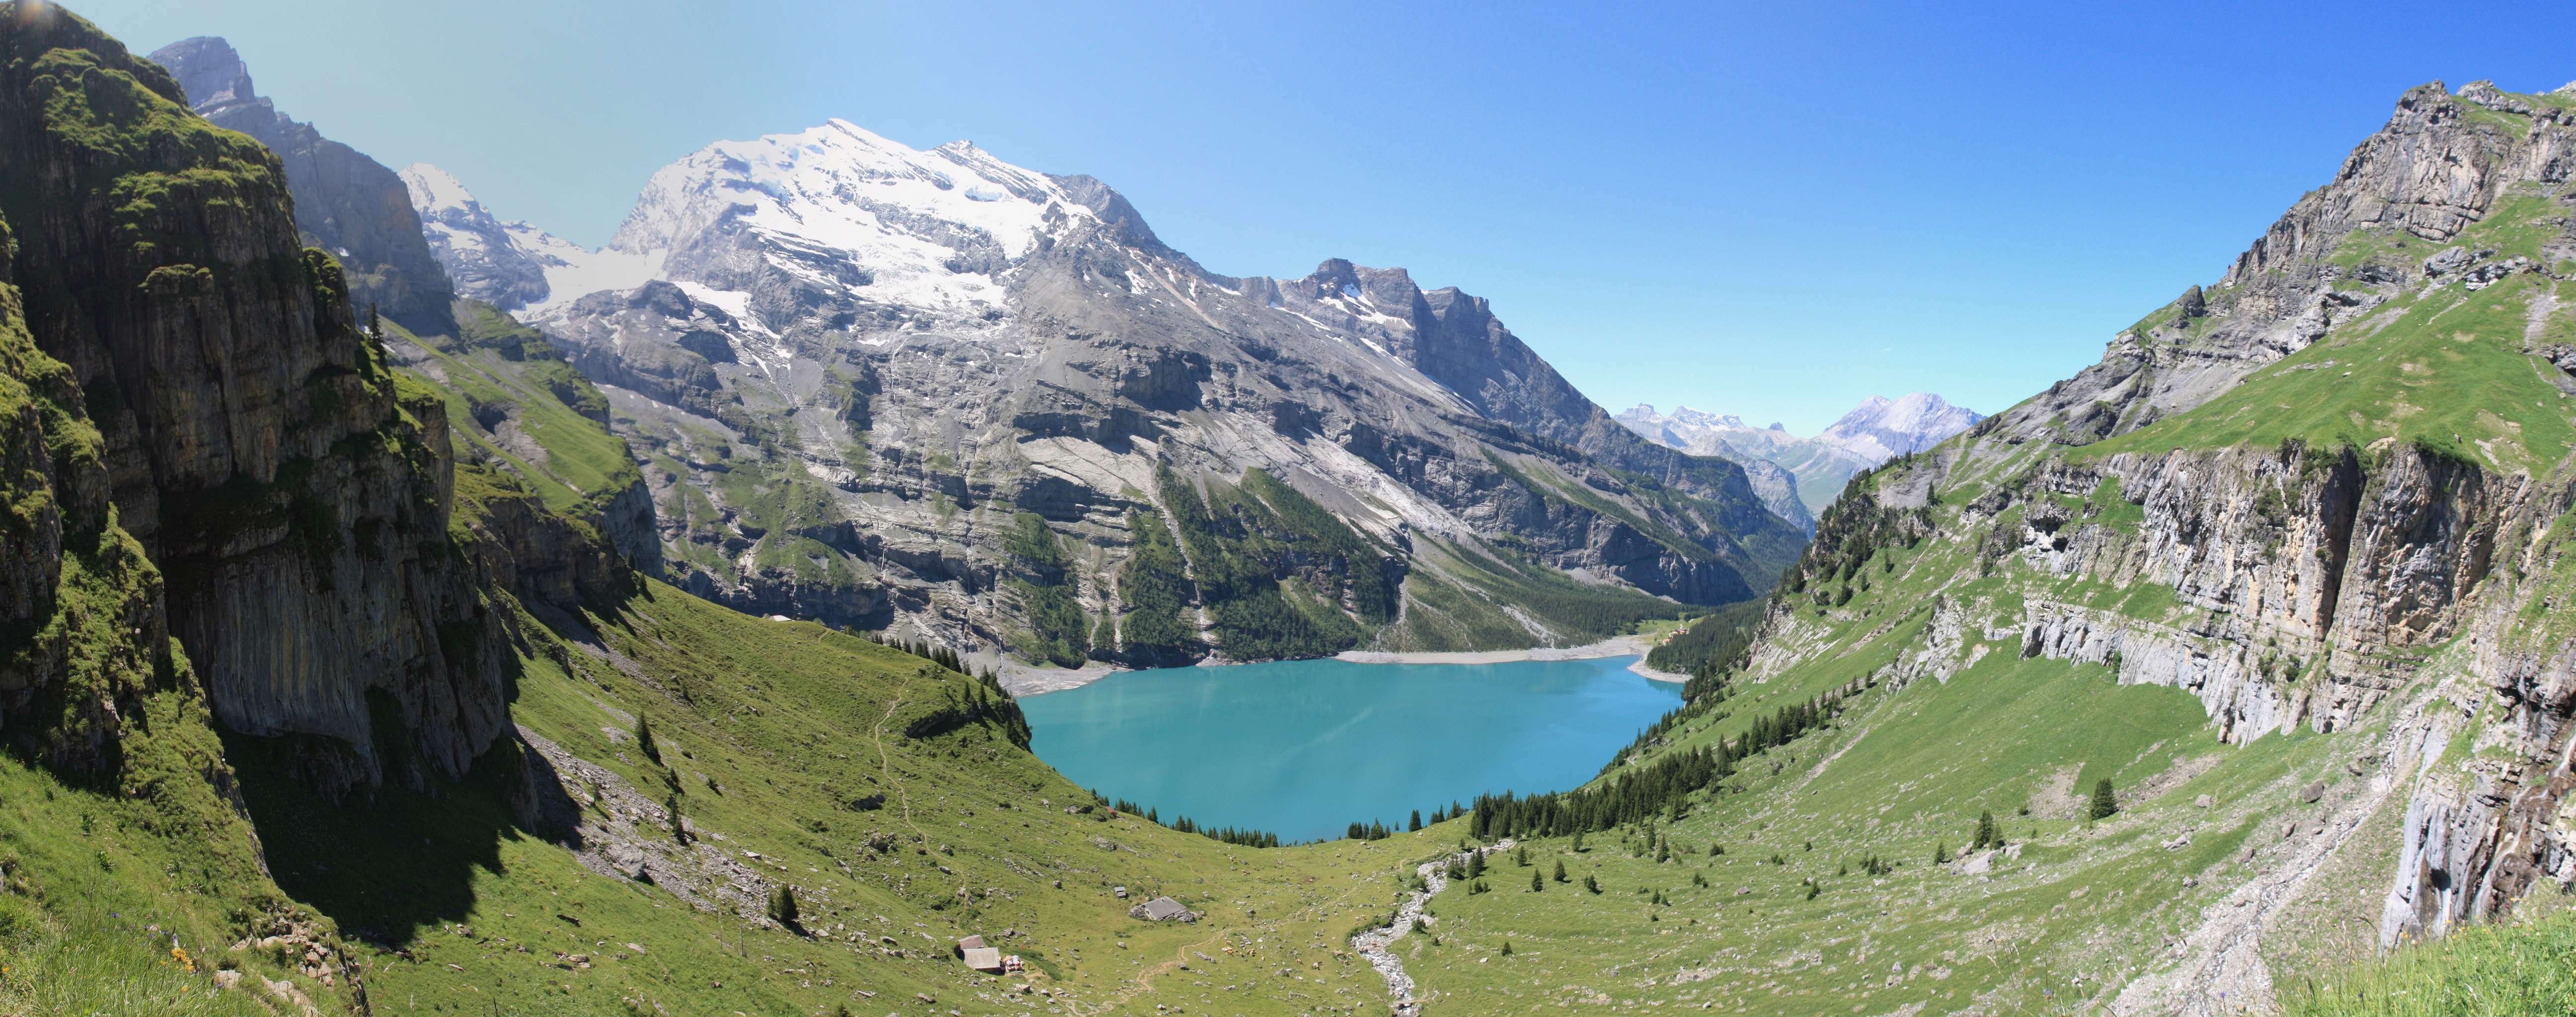 View south to Oeschinensee coming down from Hohtürli, with Doldenhorn (3638m) rising behind.